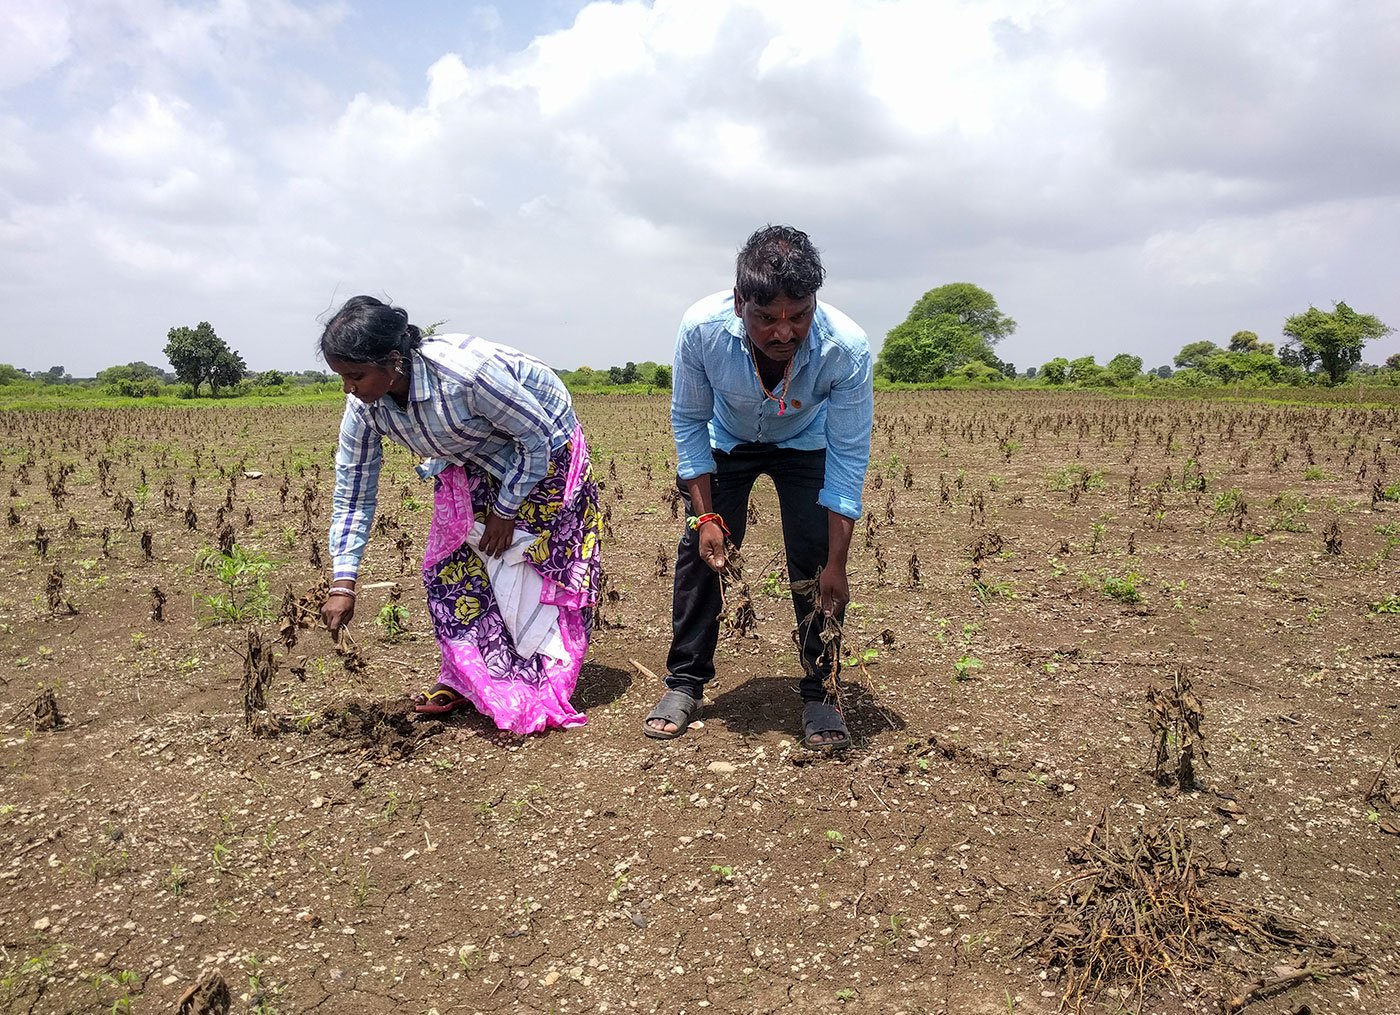 Kuntawar Sangeetha (left) and Kuntawar Gajanan (right) clearing the dead plants on their farm. They are preparing their land for cultivating chickpea in Rabi season